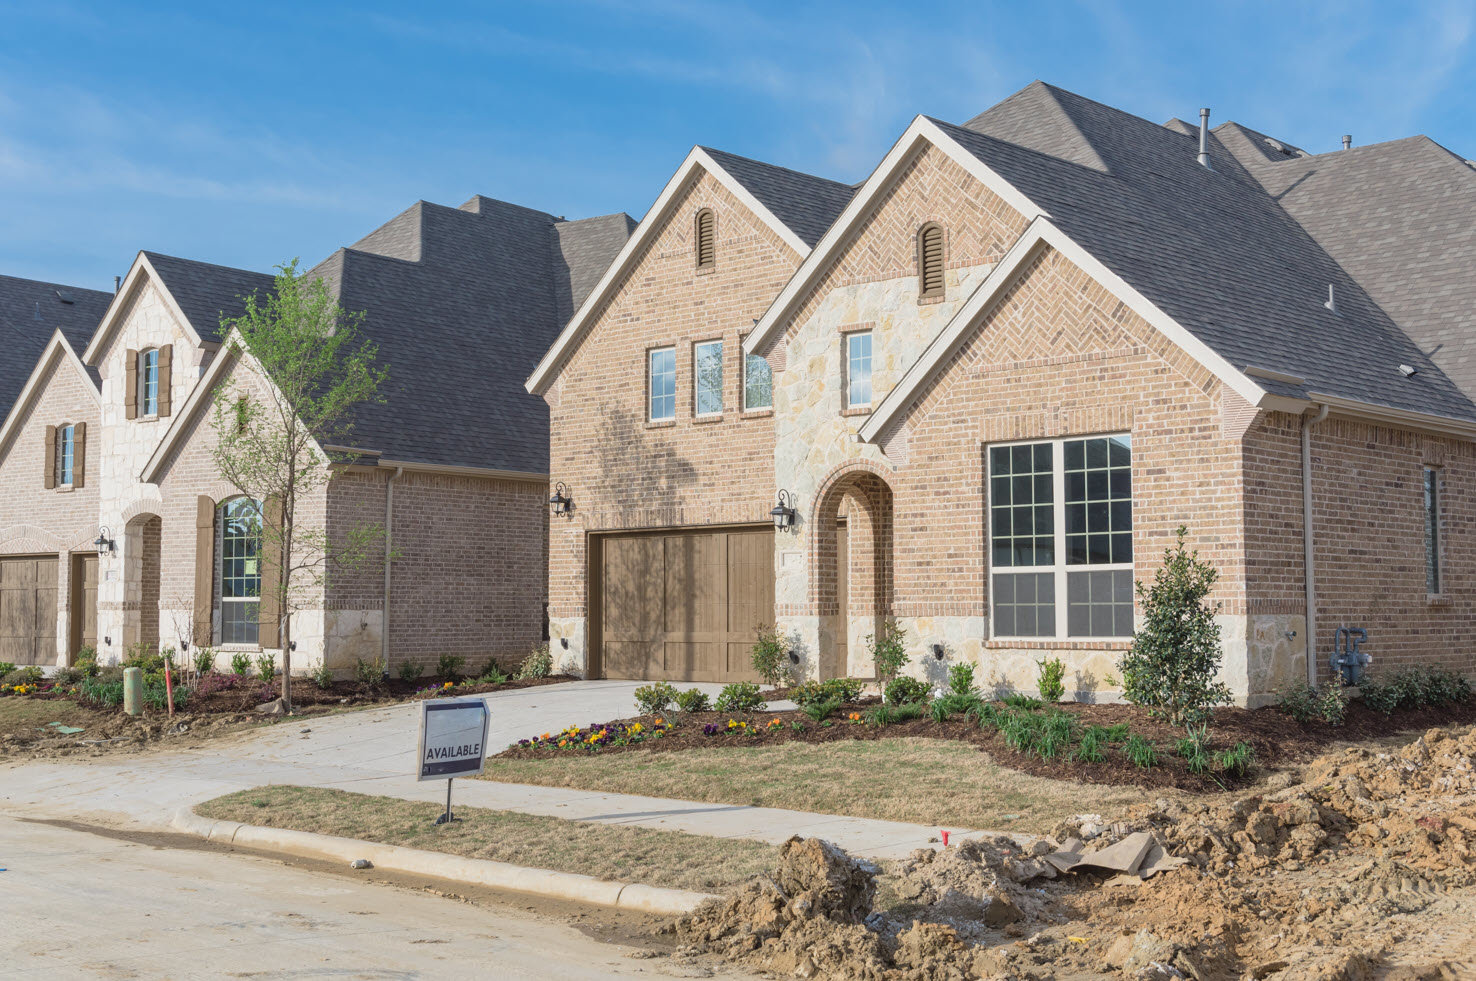 New Construction Builder Homes & Condos For Sale in Tarranty County, TX